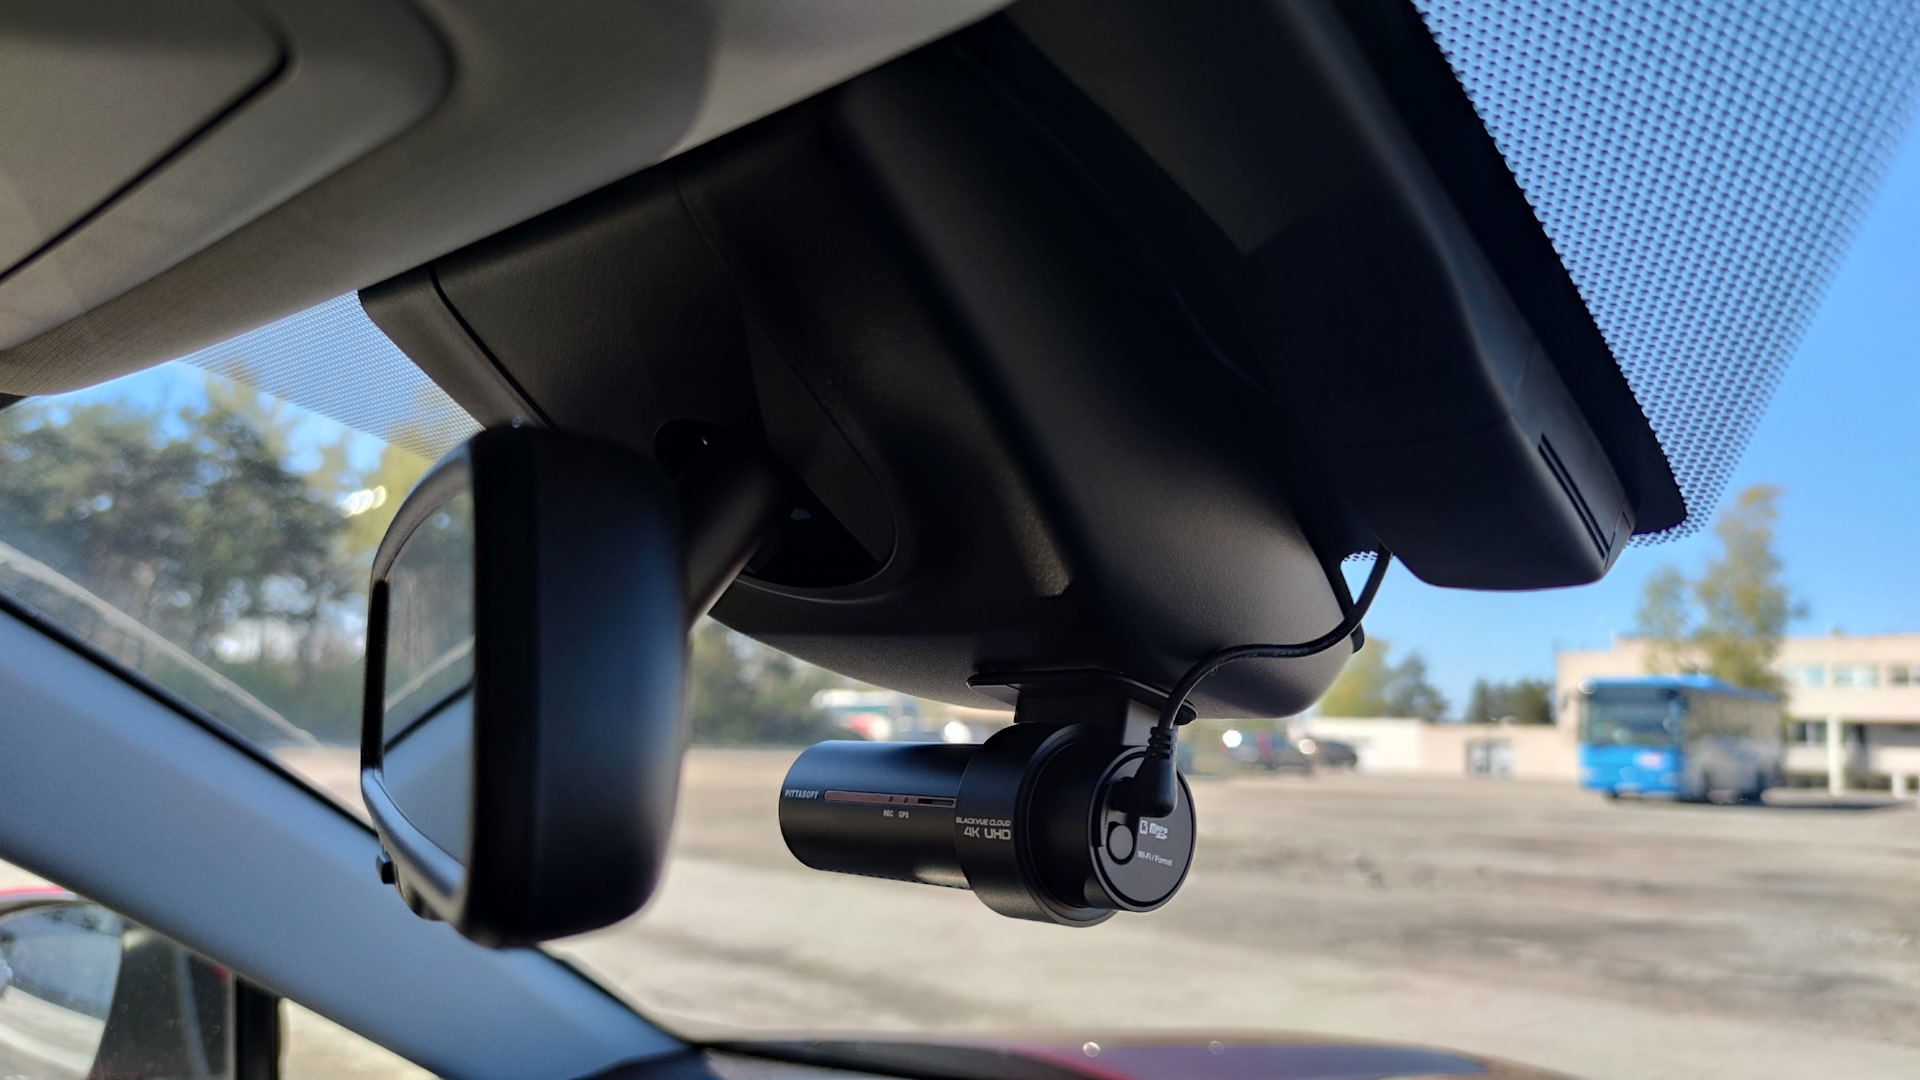 ADAS Camera Market Research Trends Analysis by 2017-2032